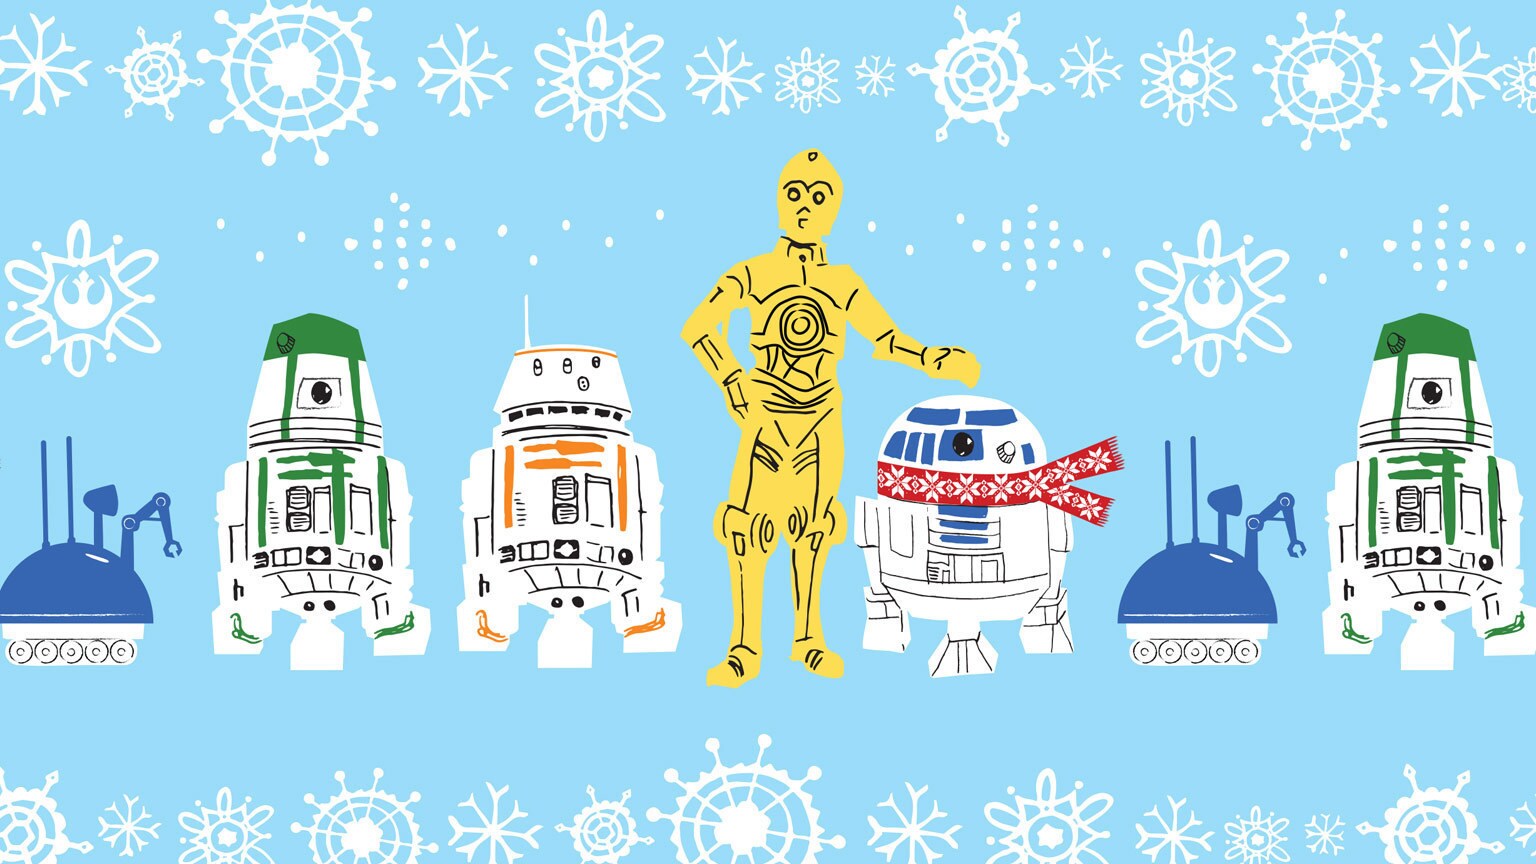 Happy Holidays and May the Force Be With You!